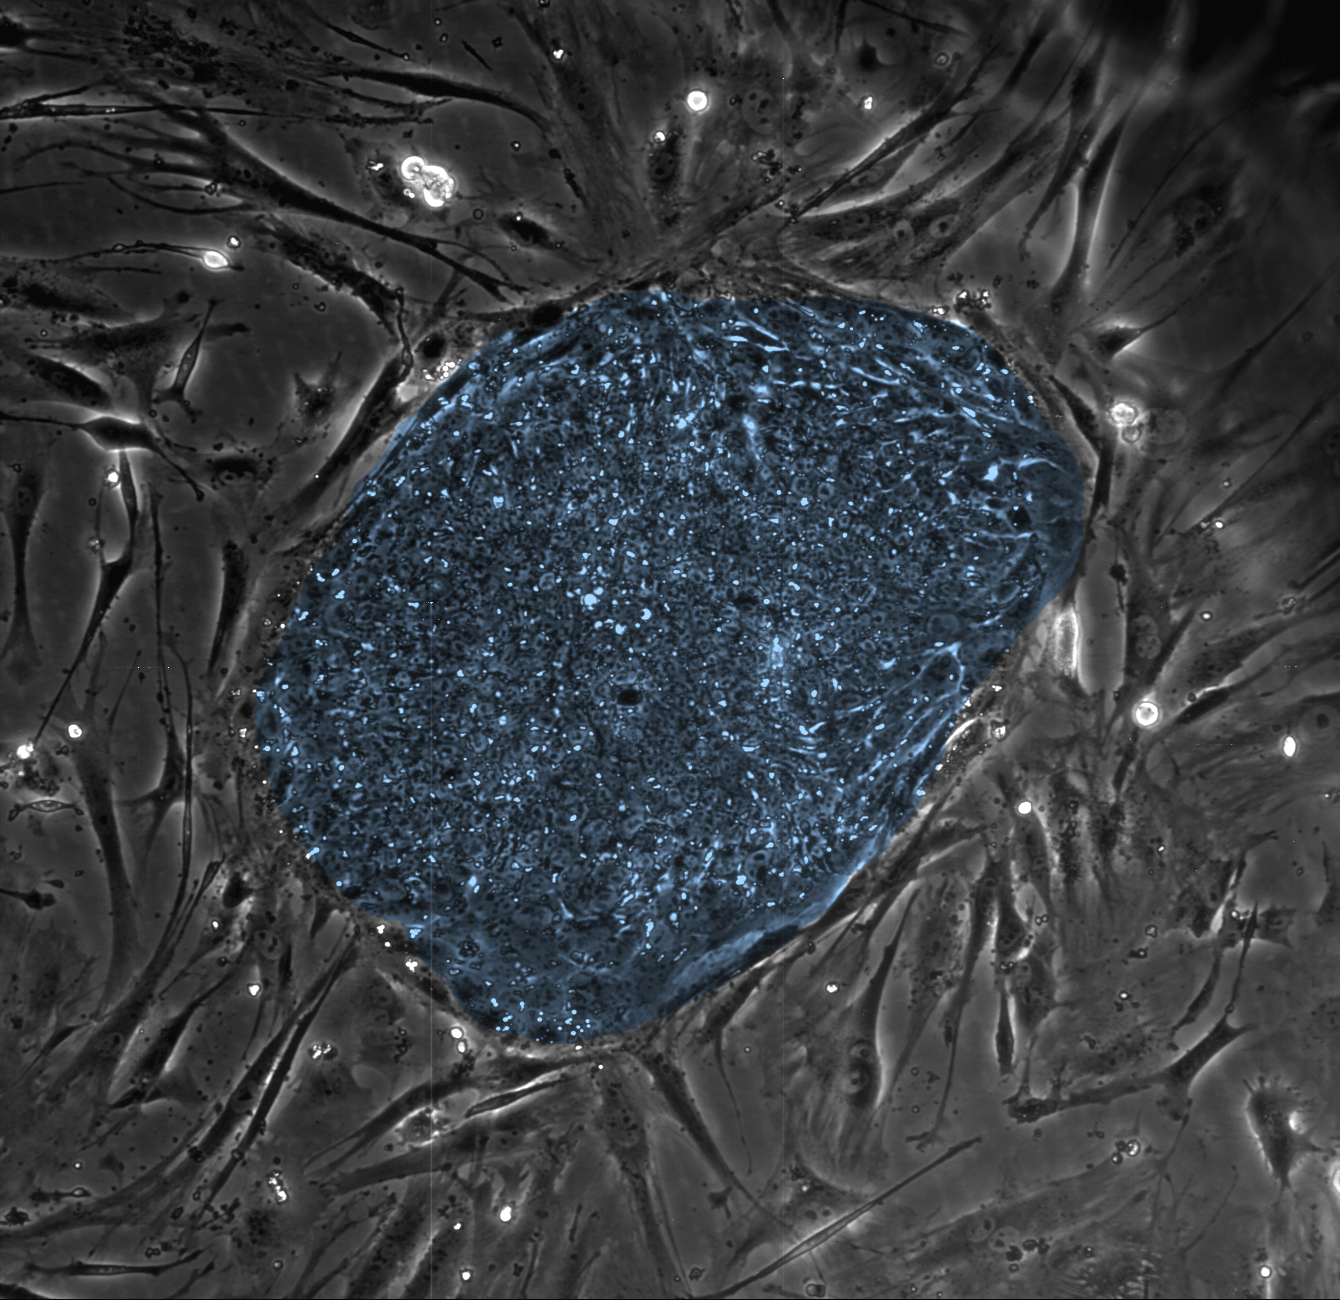 A colony of human embryonic stem cells (center, blue) from the lab of the University of Wisconsin-Madison's James Thomson. These cells, which arise at the earliest stages of development, are blank slate cells capable of differentiating into any of the 220 types of cells or tissues in the human body, and can provide access to tissue and cells for basic research and potential therapies. Photo by Clay Glennon/Thomson Lab, used with permission by UW-Madison University Communications 